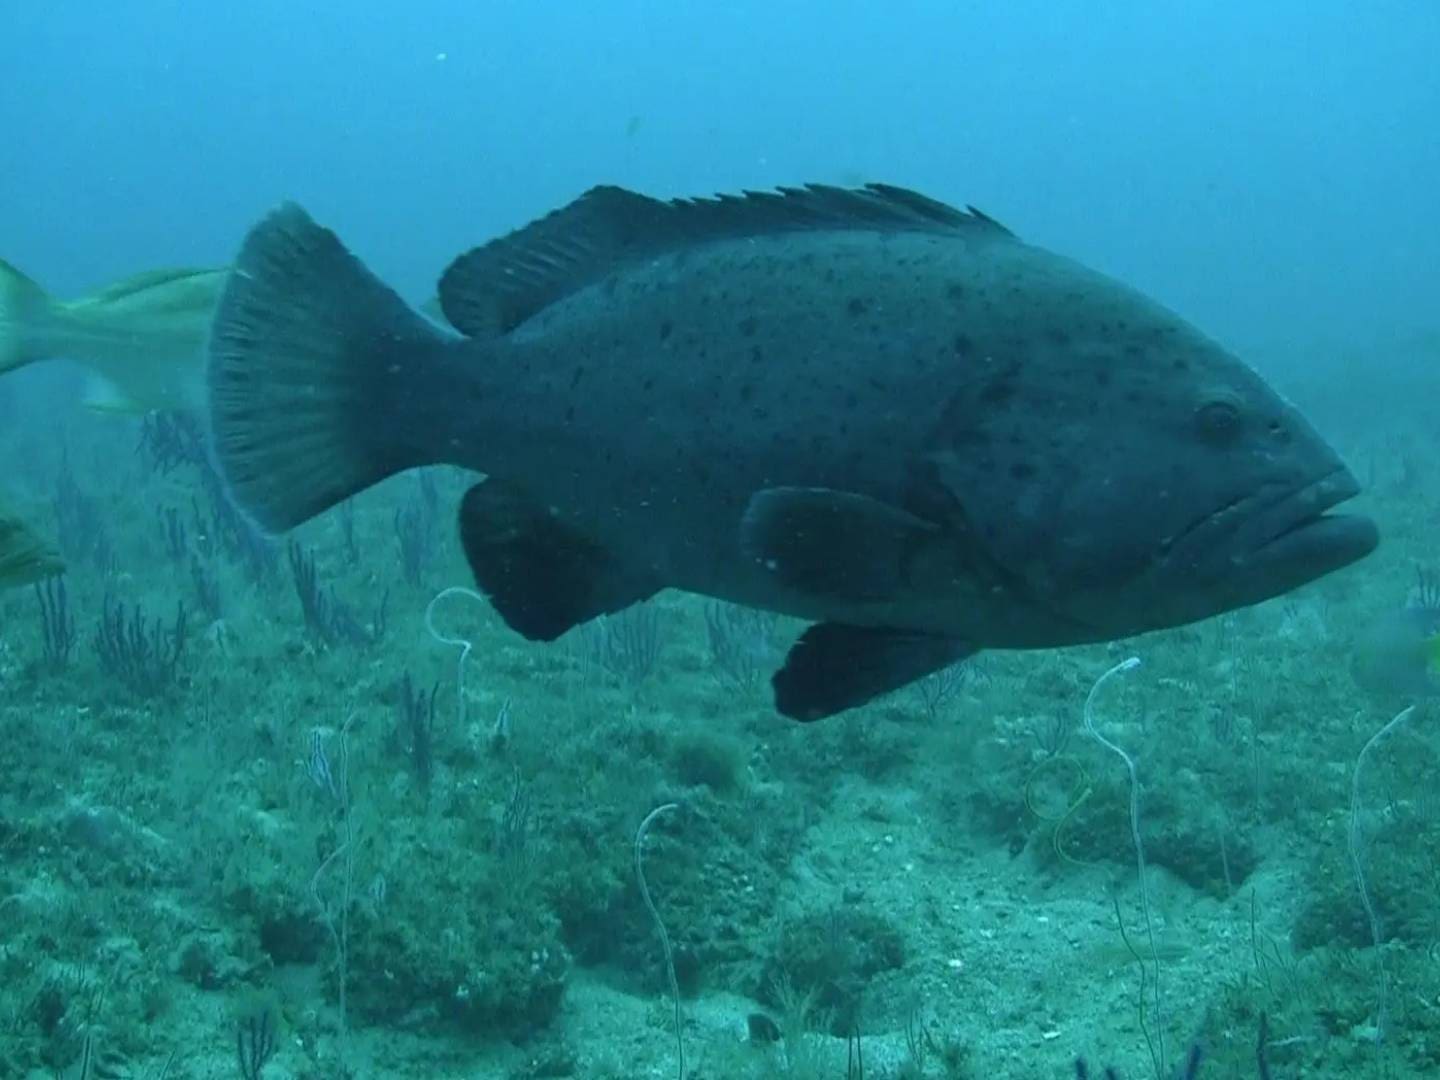 A large fish swimming in the ocean.